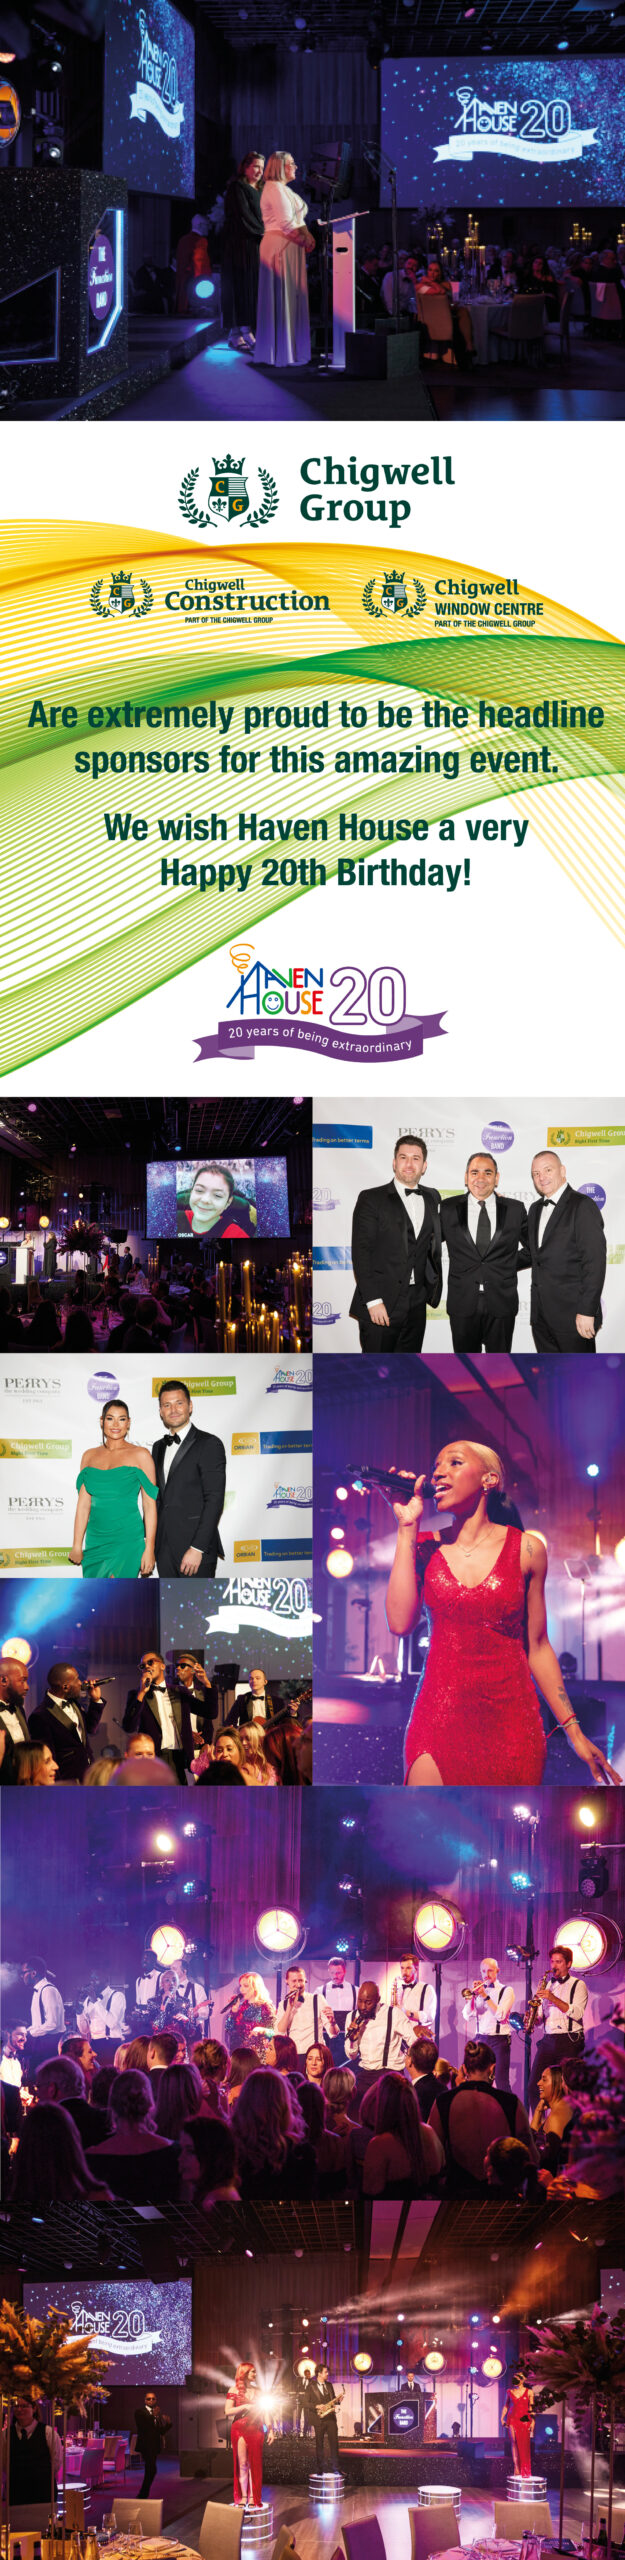 Chigwell Group headline sponsor of Haven Houses 20th birthday at The Londoner